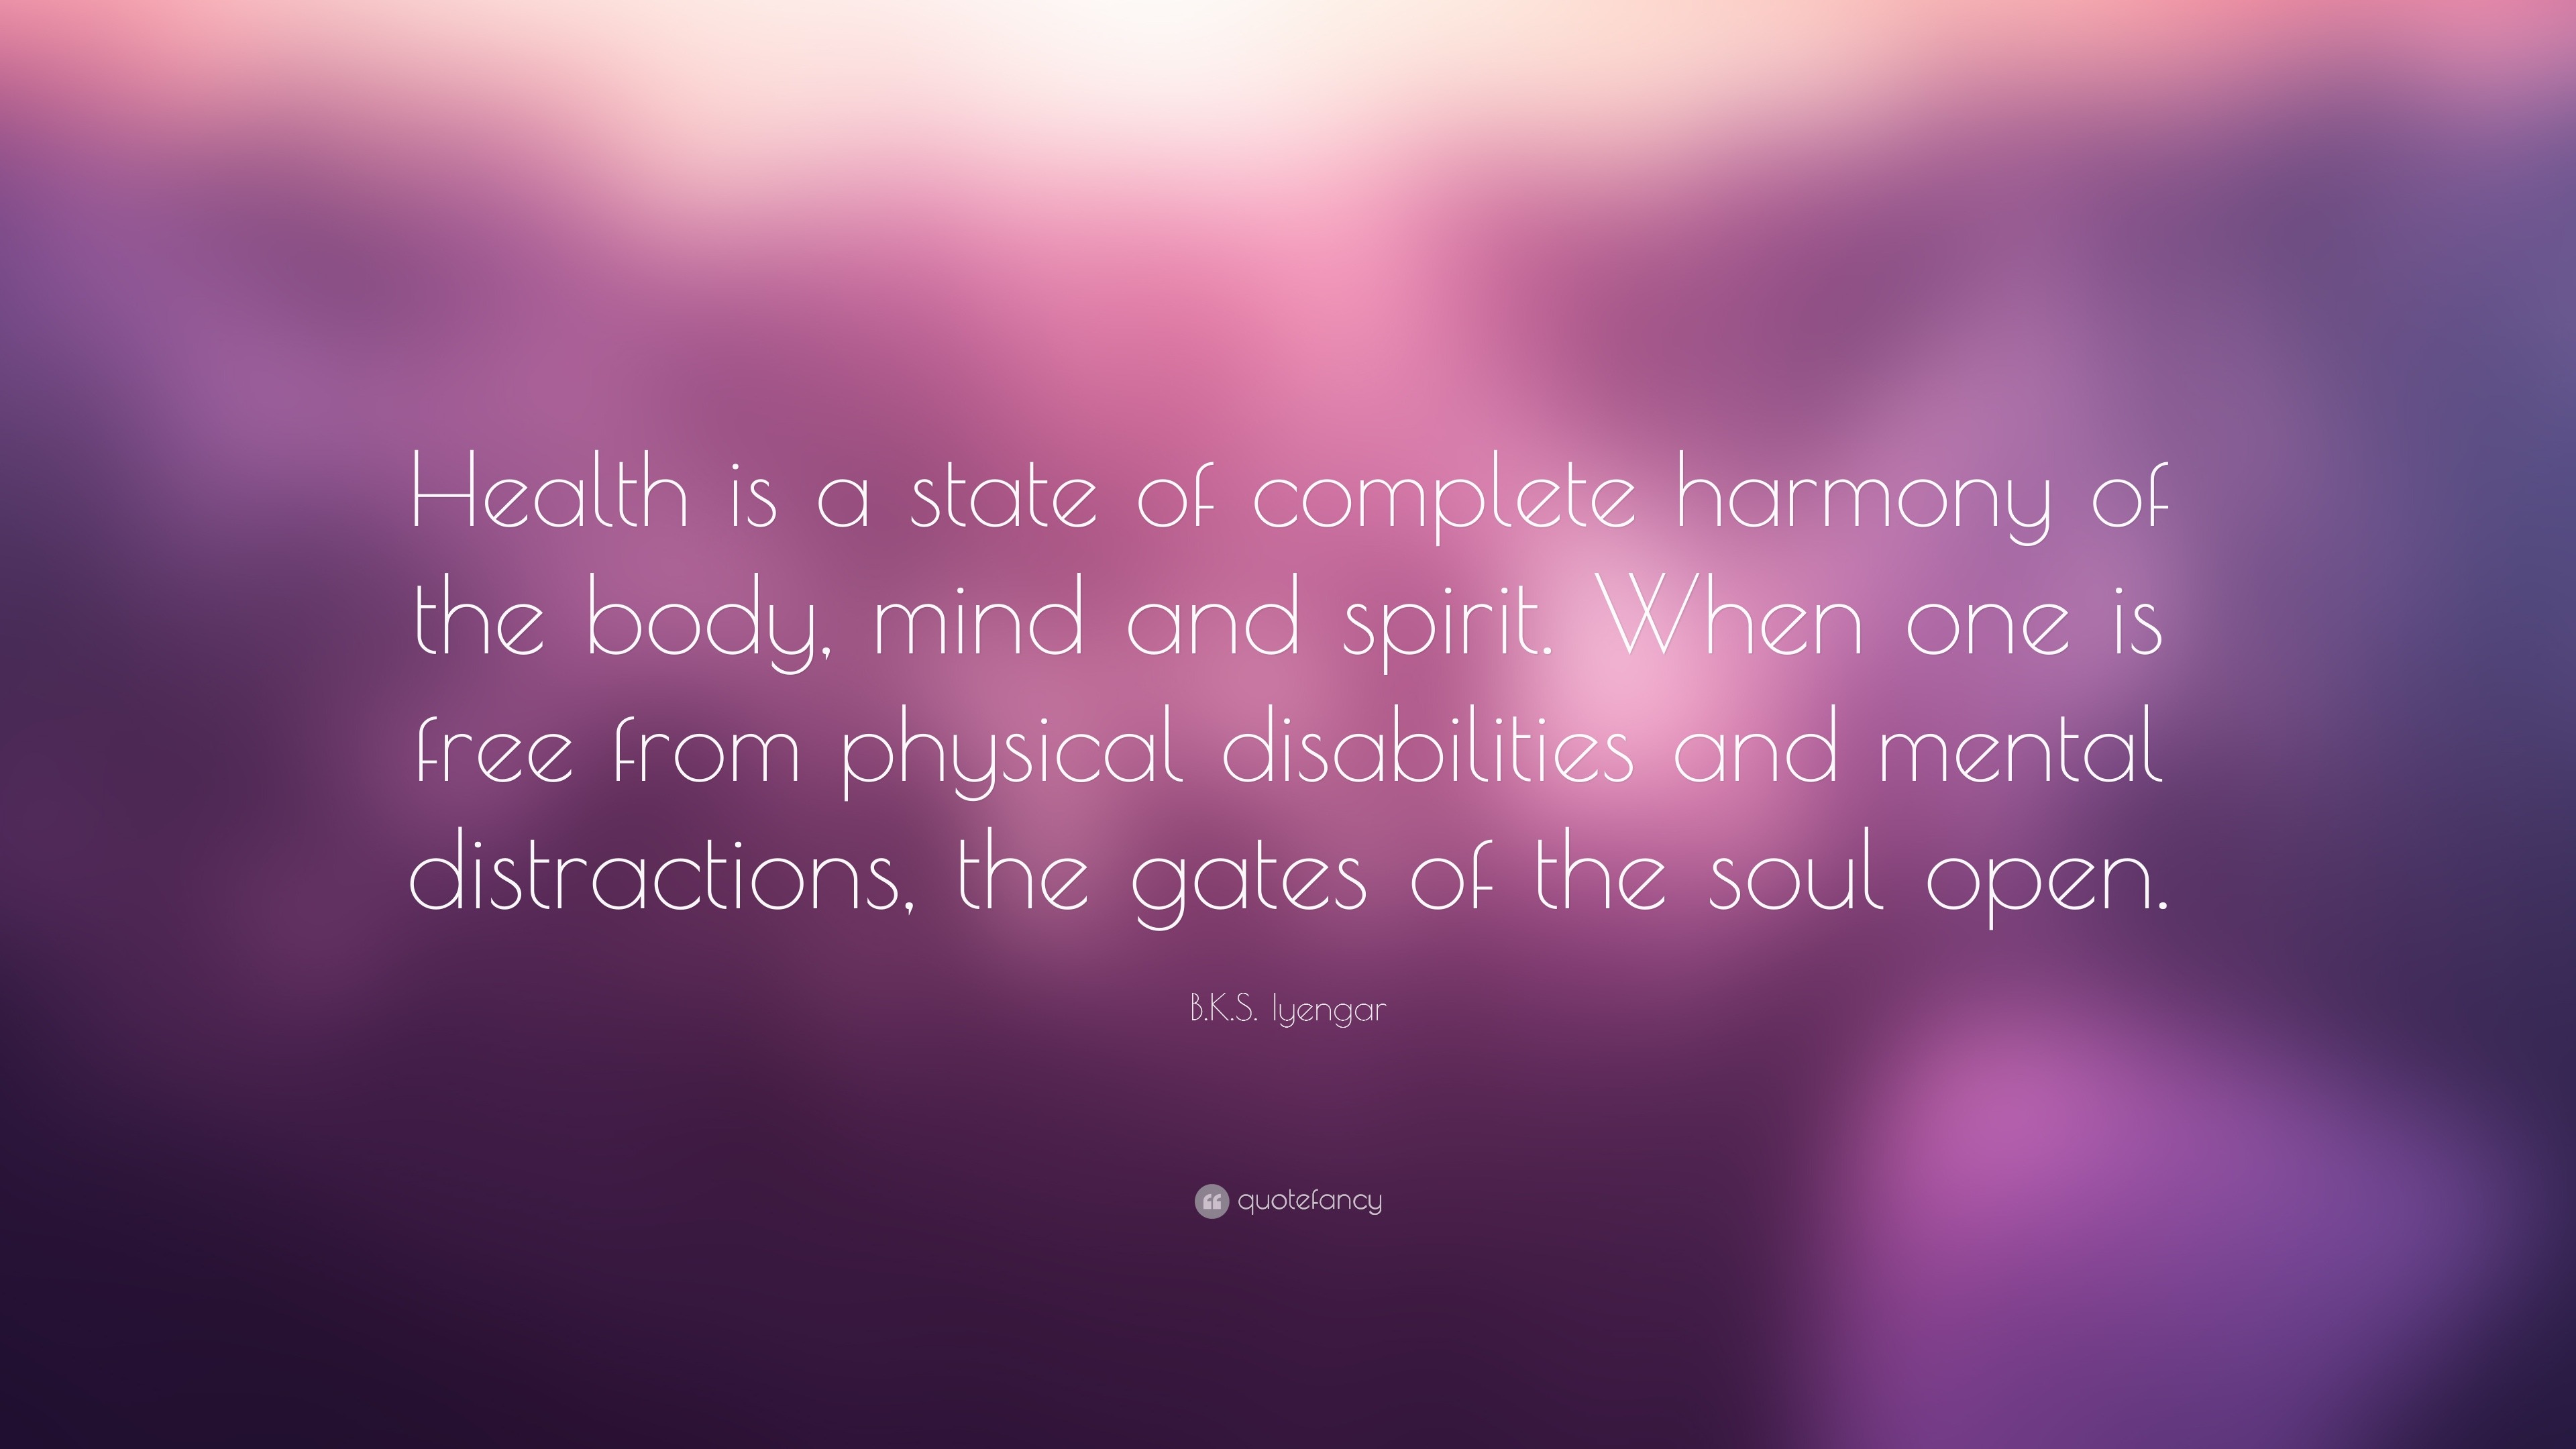 49482 B K S Iyengar Quote Health is a state of complete harmony of the